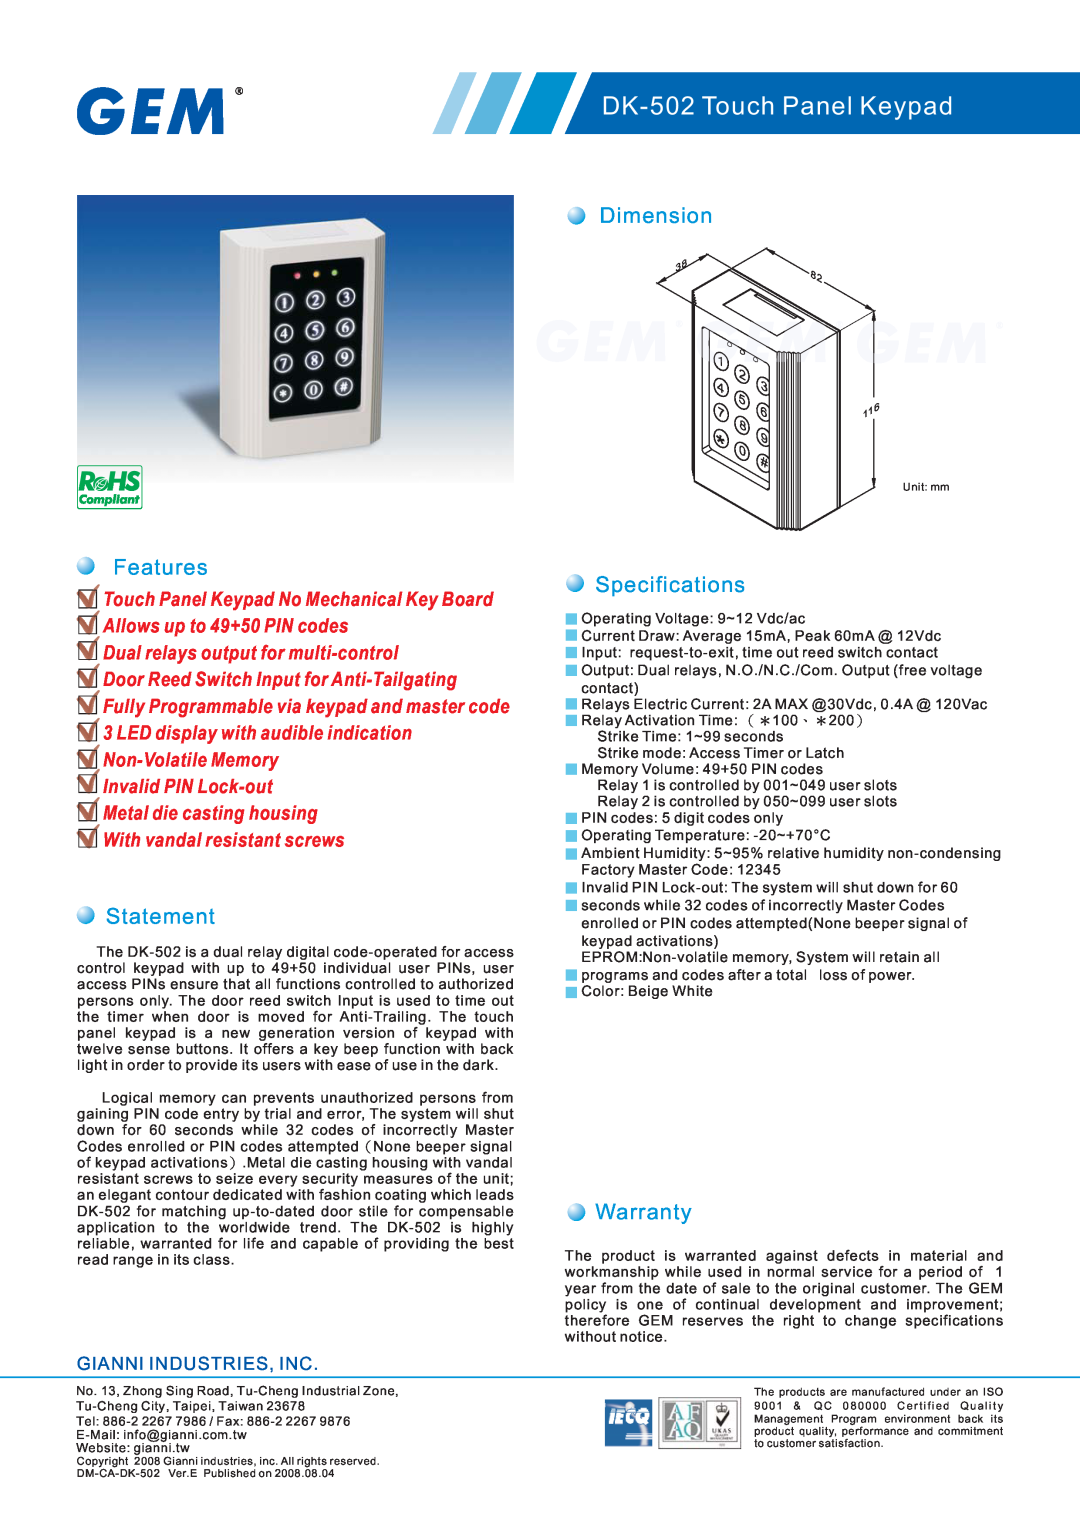 Gianni Industries warranty DK-502 Touch Panel Keypad, Dimension, Features, Specifications, Statement, Warranty 